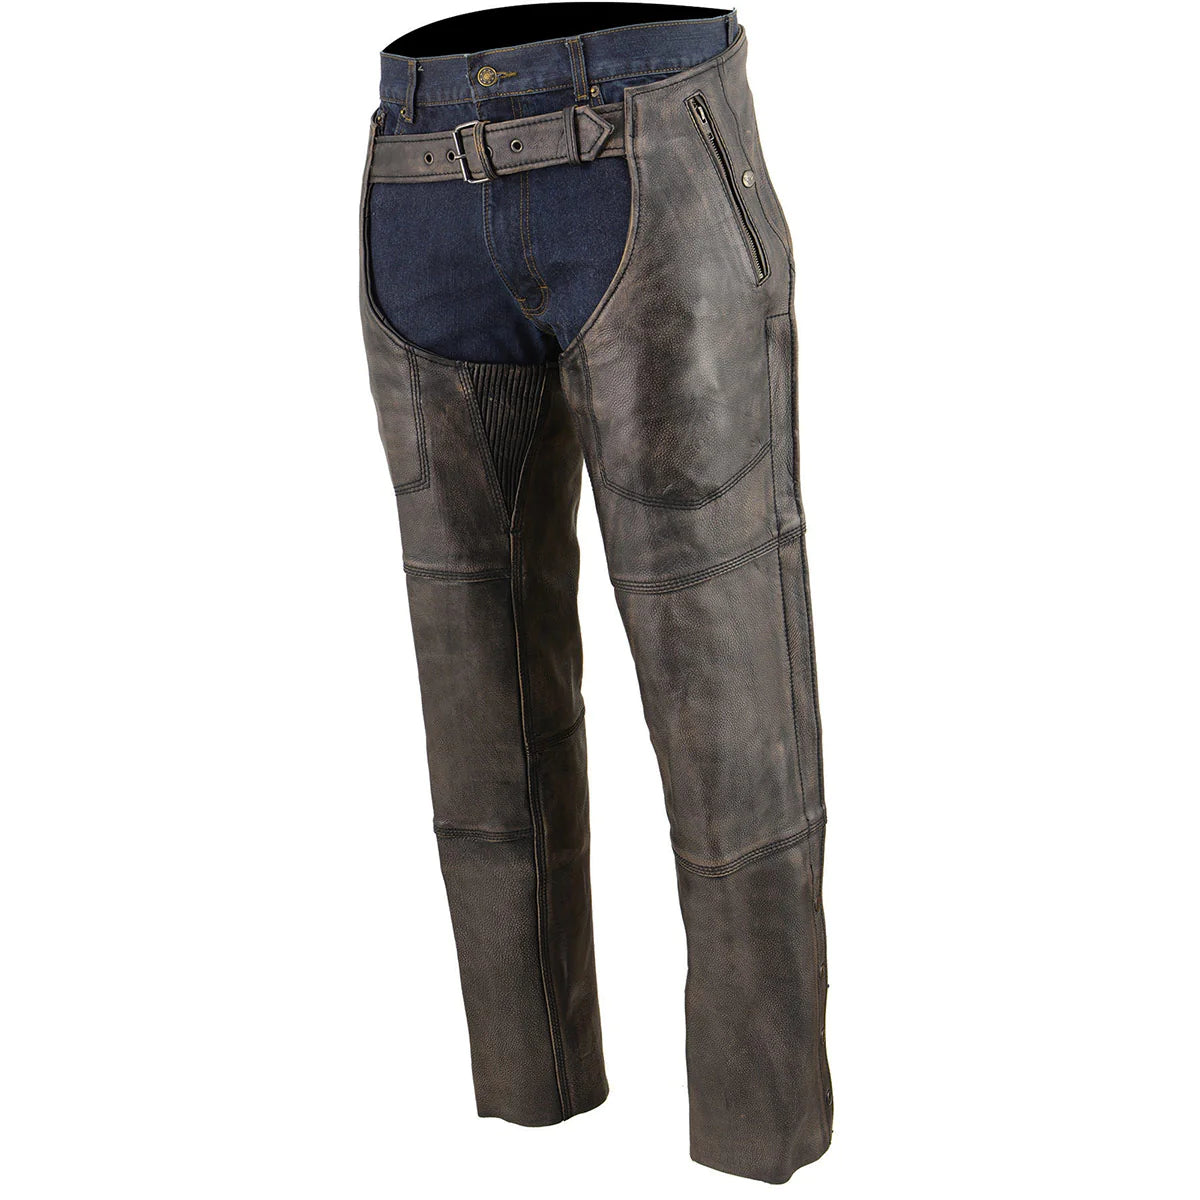 Men's Distressed Brown Four Pocket Thermal Lined Leather Chaps